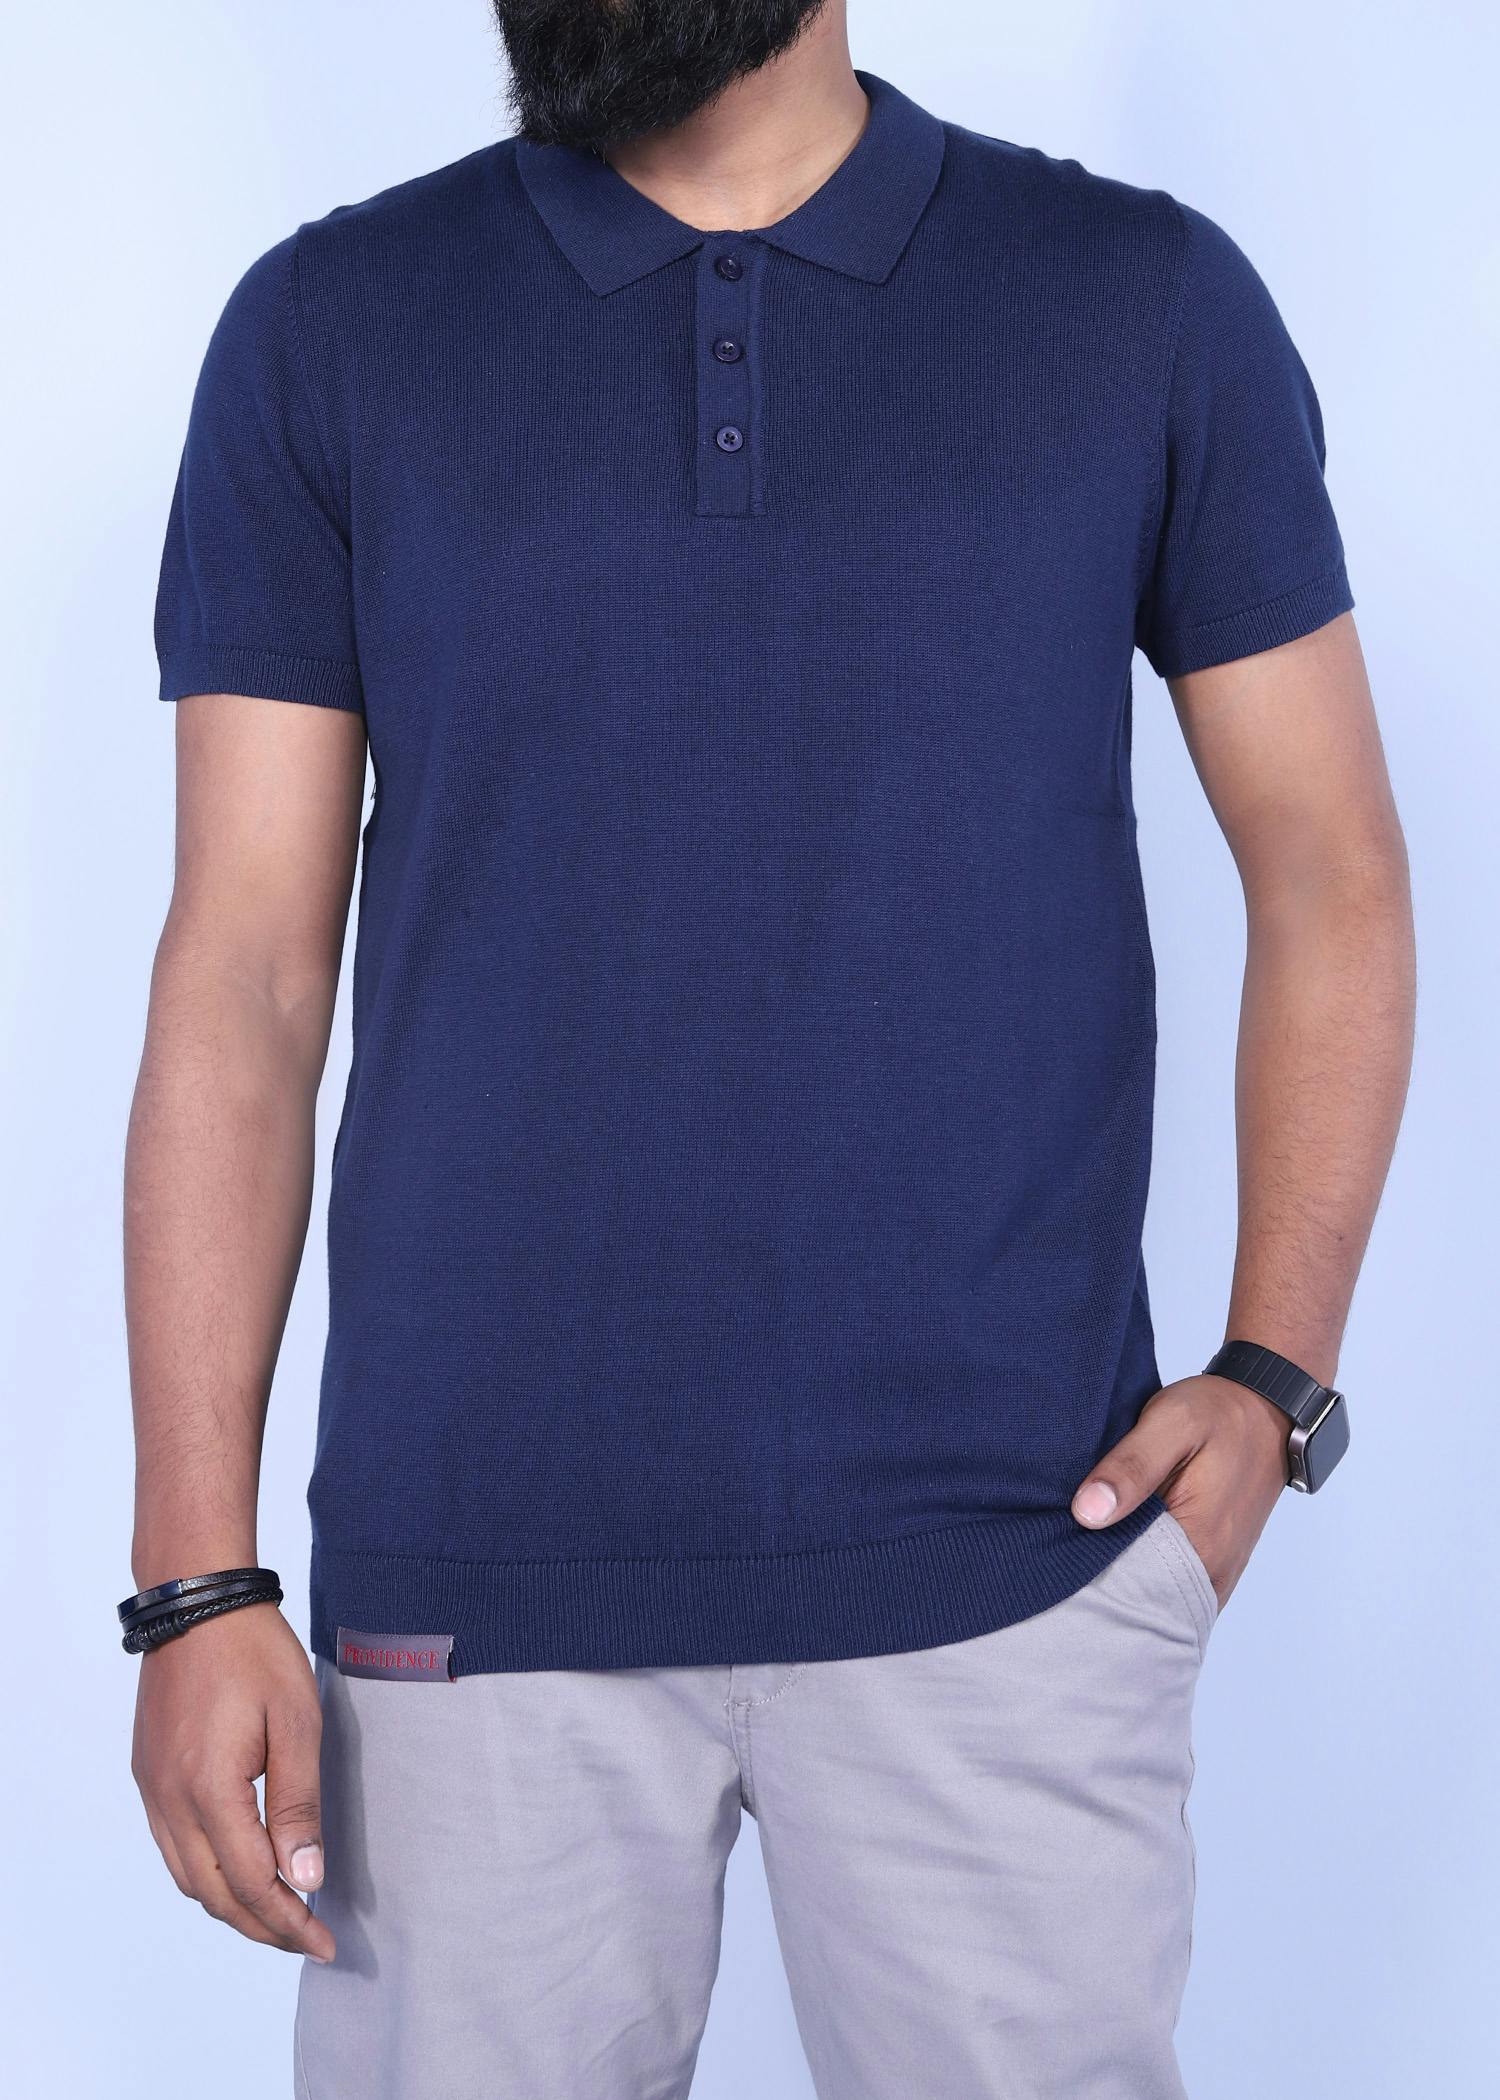 nightingale viii polo blue color half front view